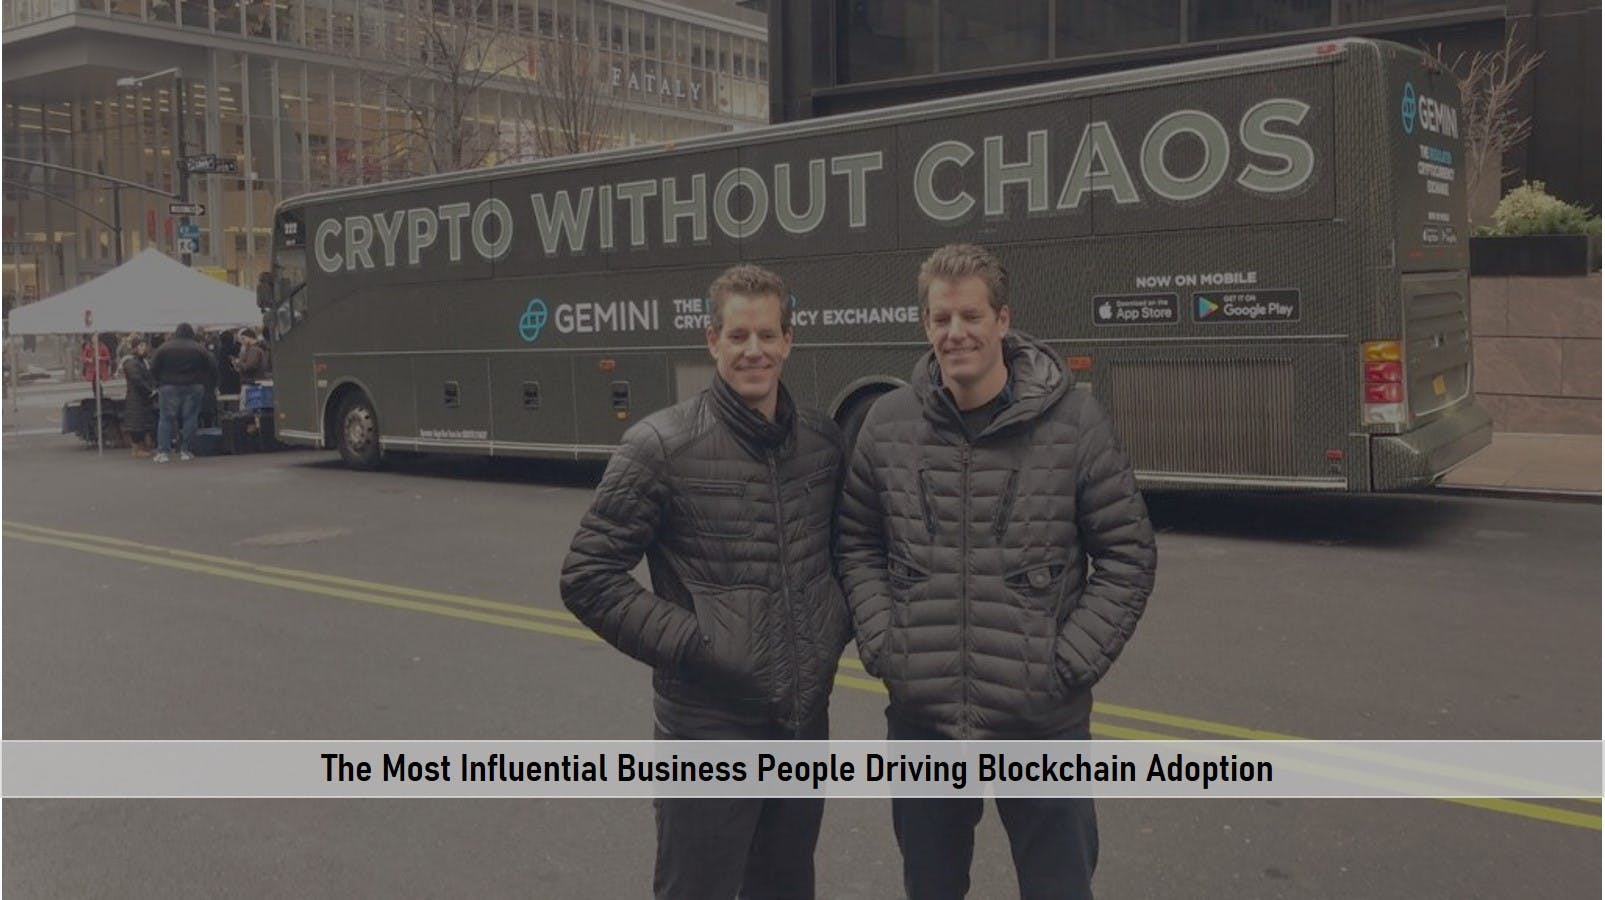 The Most Influential Business People Driving Blockchain Adoption